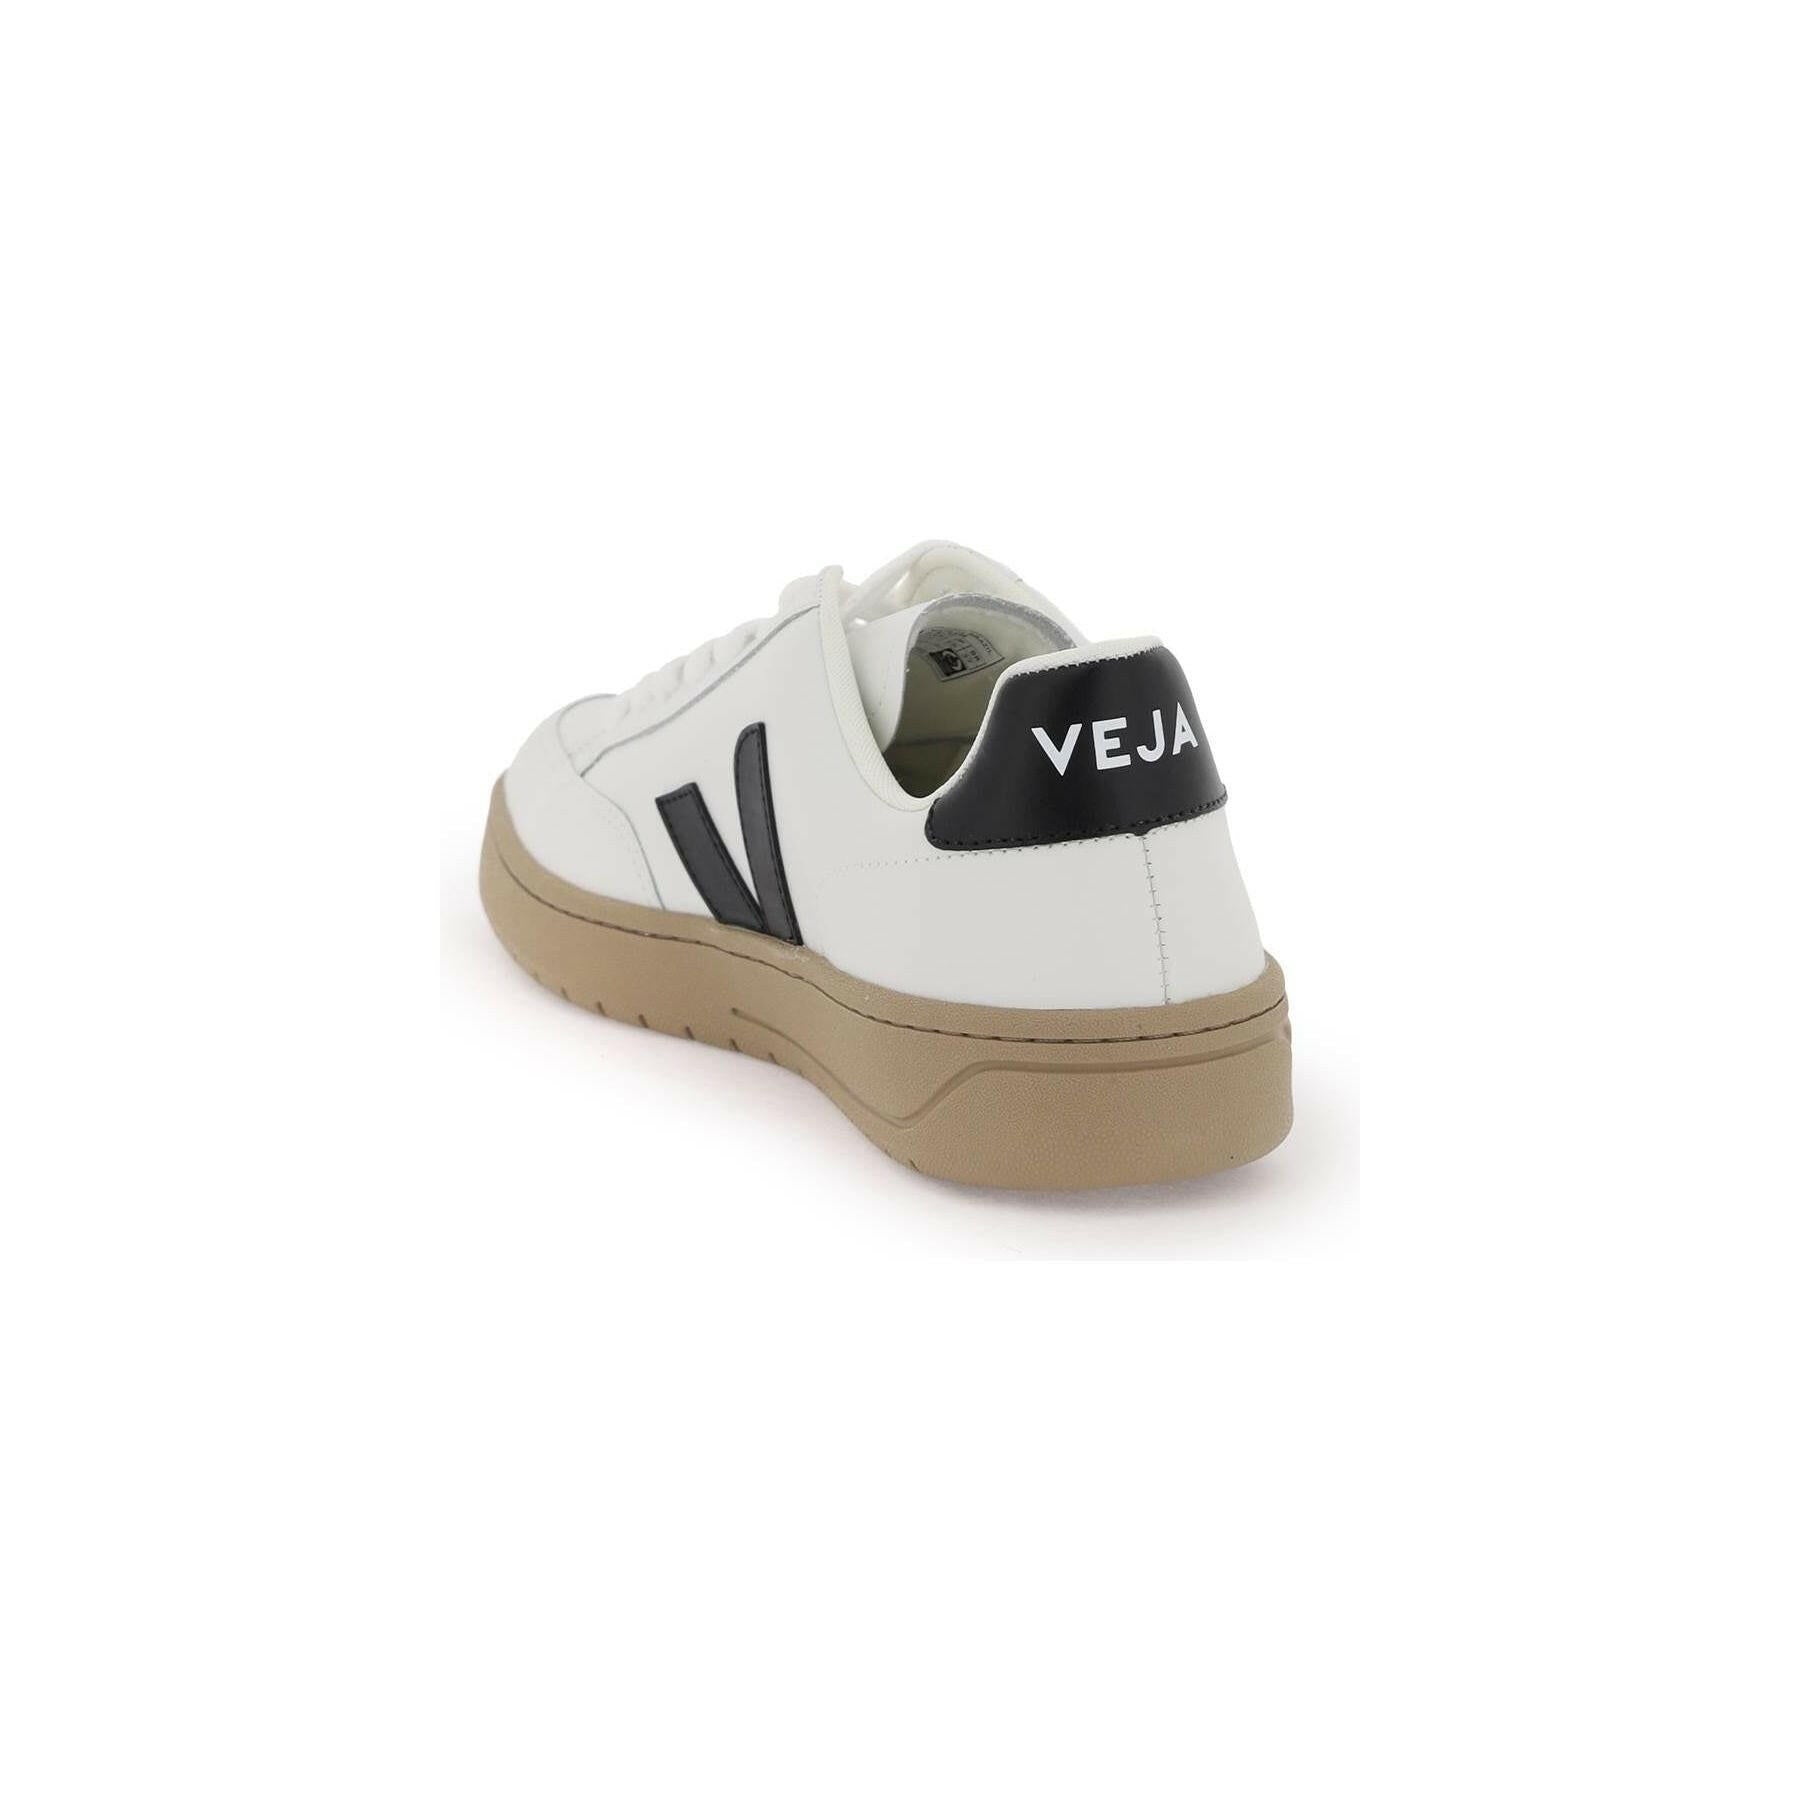 V-12 Leather Sneakers.